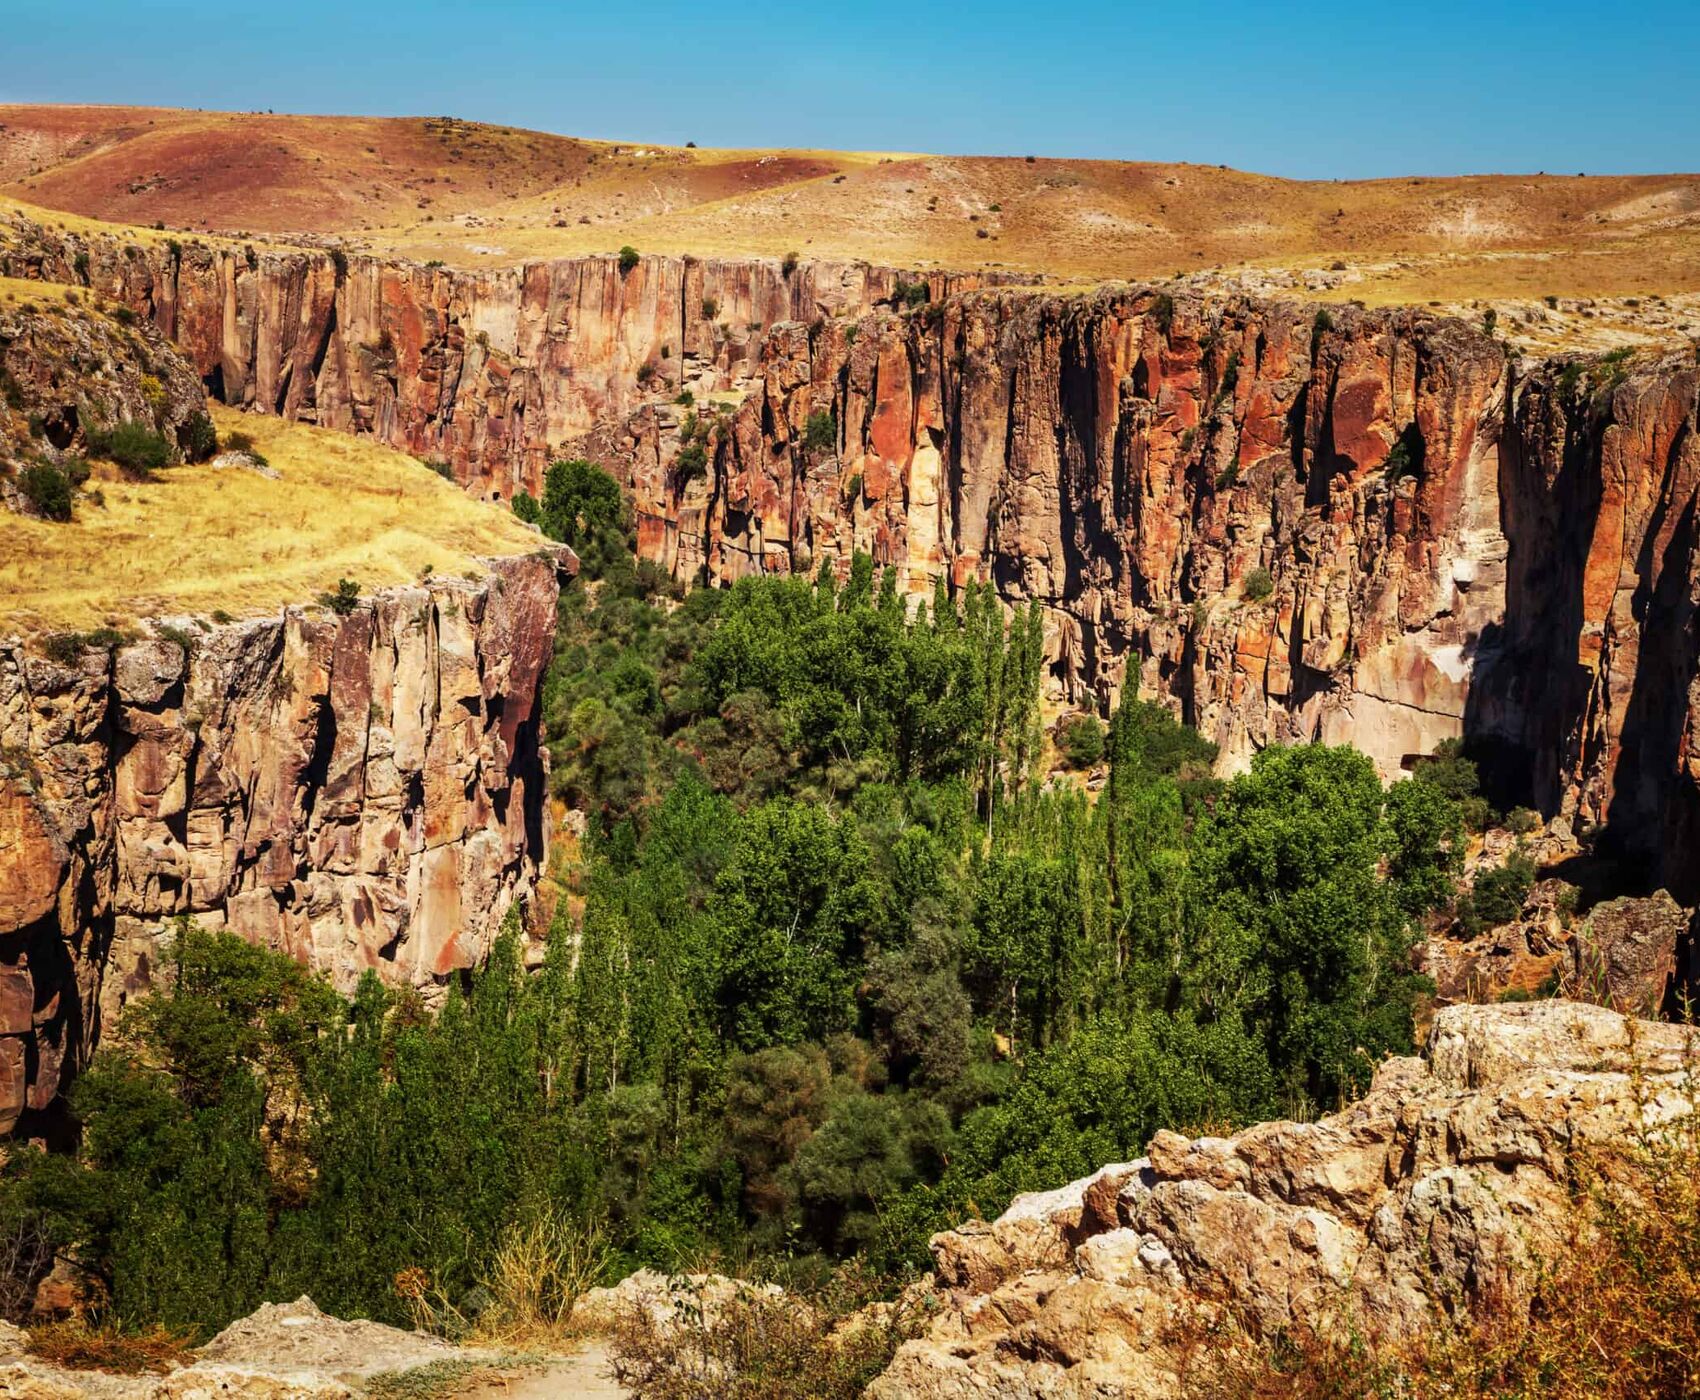 CENTRAL ANATOLIA TOUR BY BUS